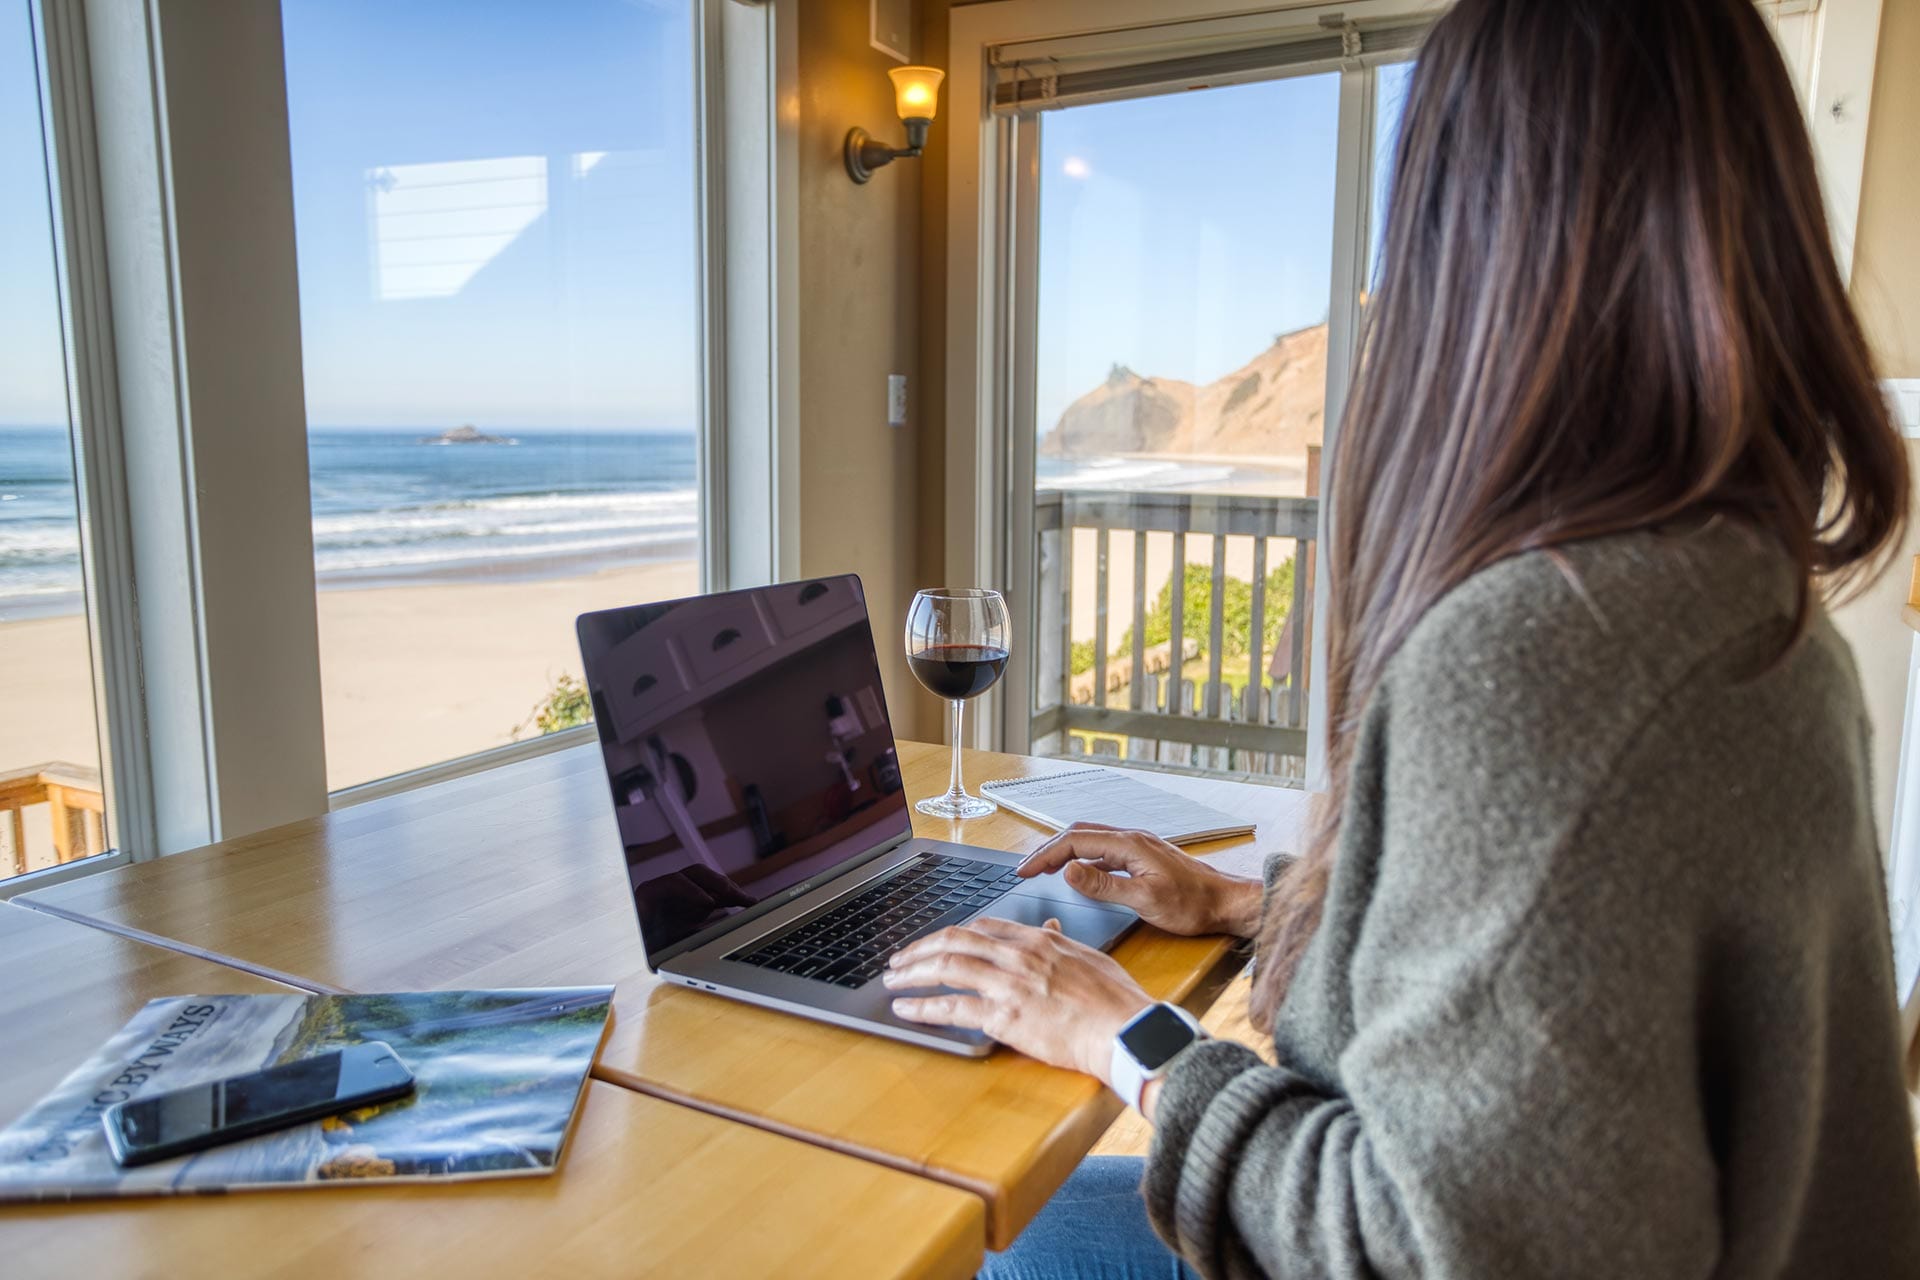 Work From Home With a View! Top Tips for Booking an Oregon Coast or Central Oregon Vacation Rental for Working Remotely